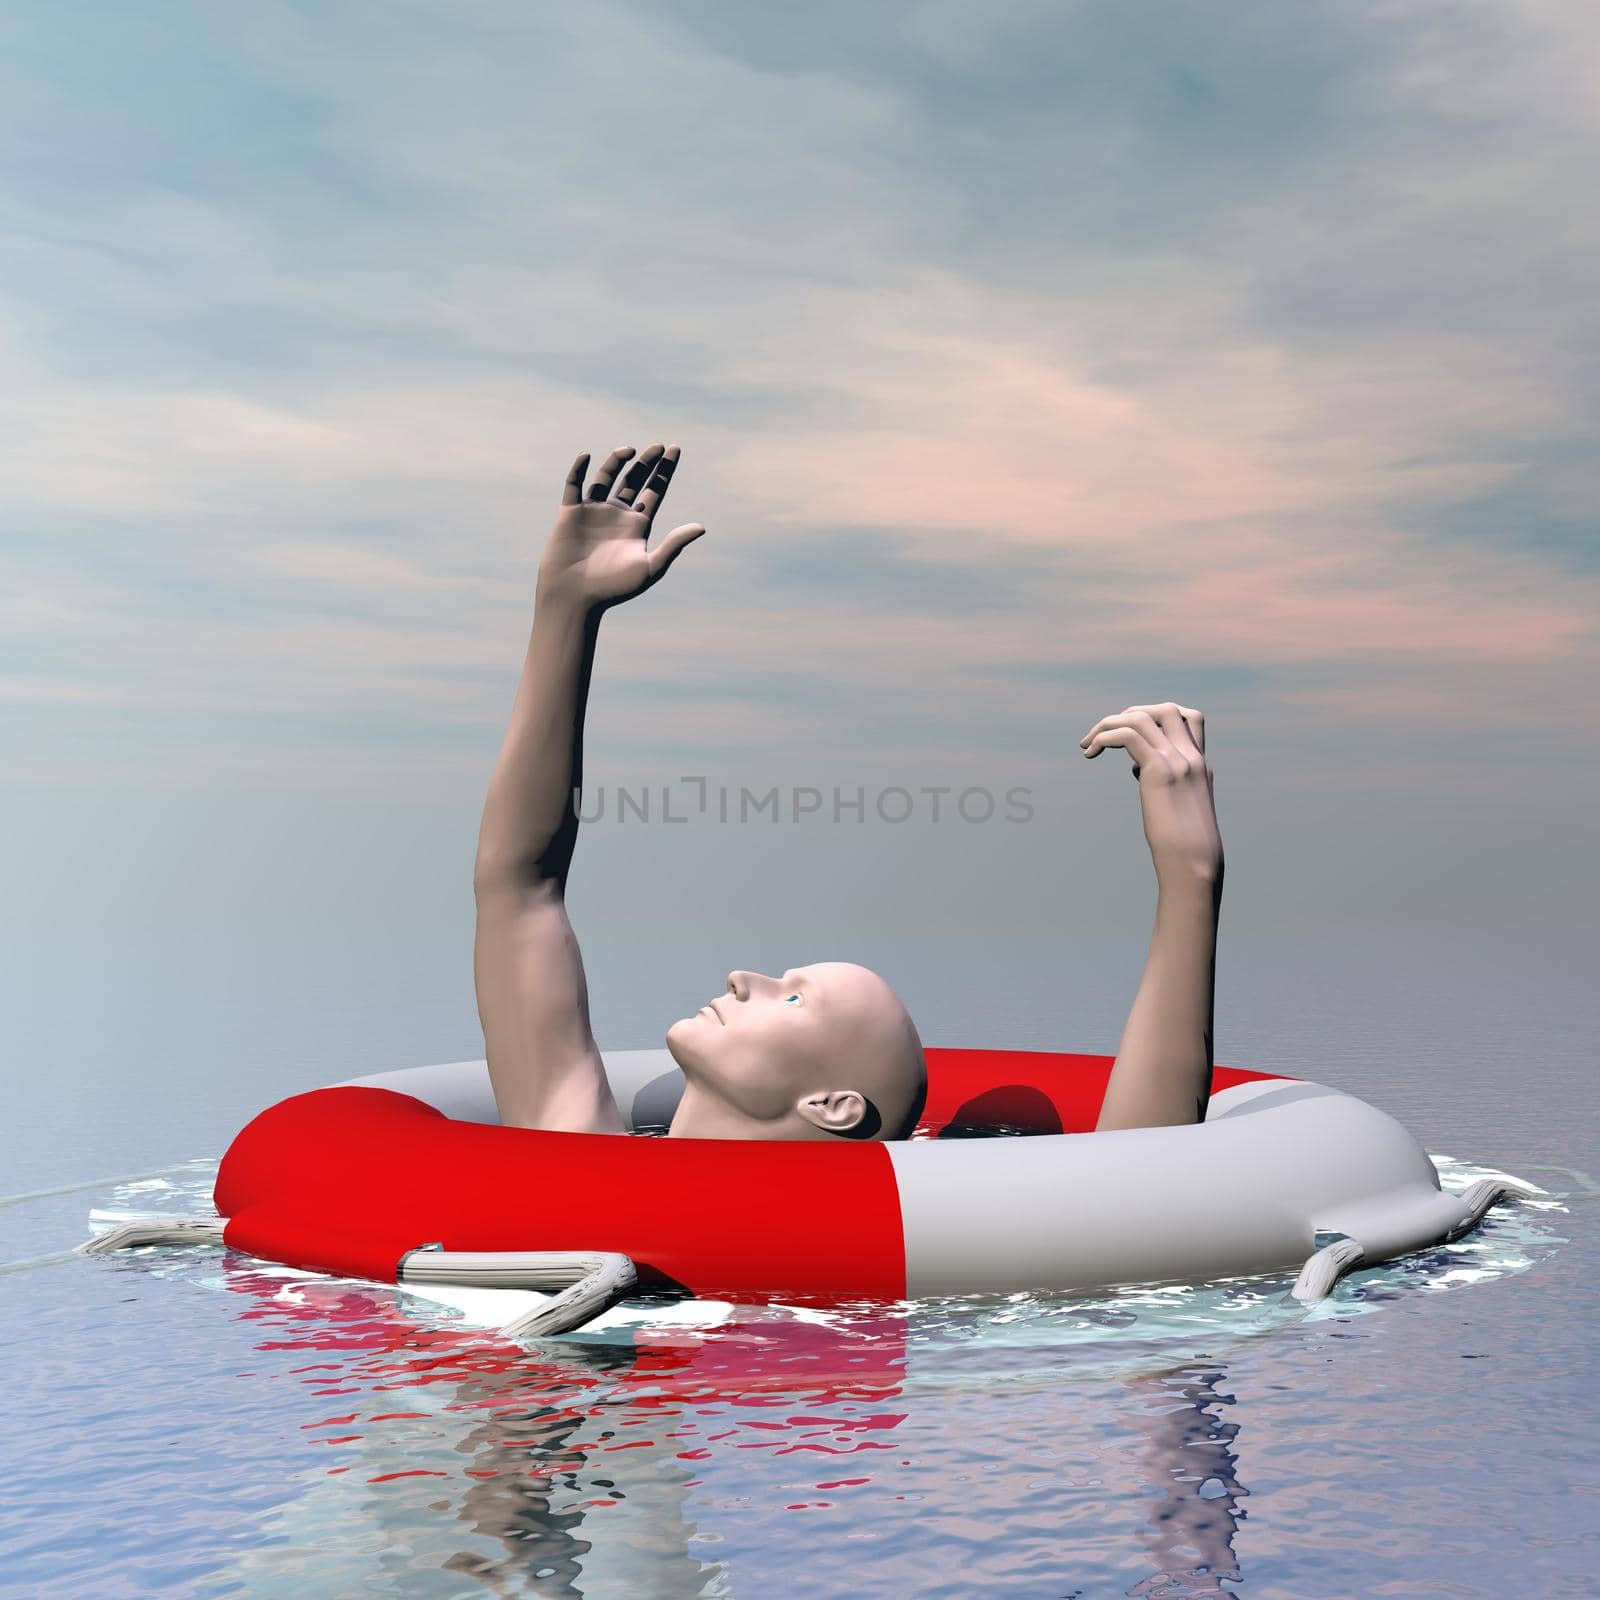 Man drowning in the ocean despite having y buoy to help by cloudy day